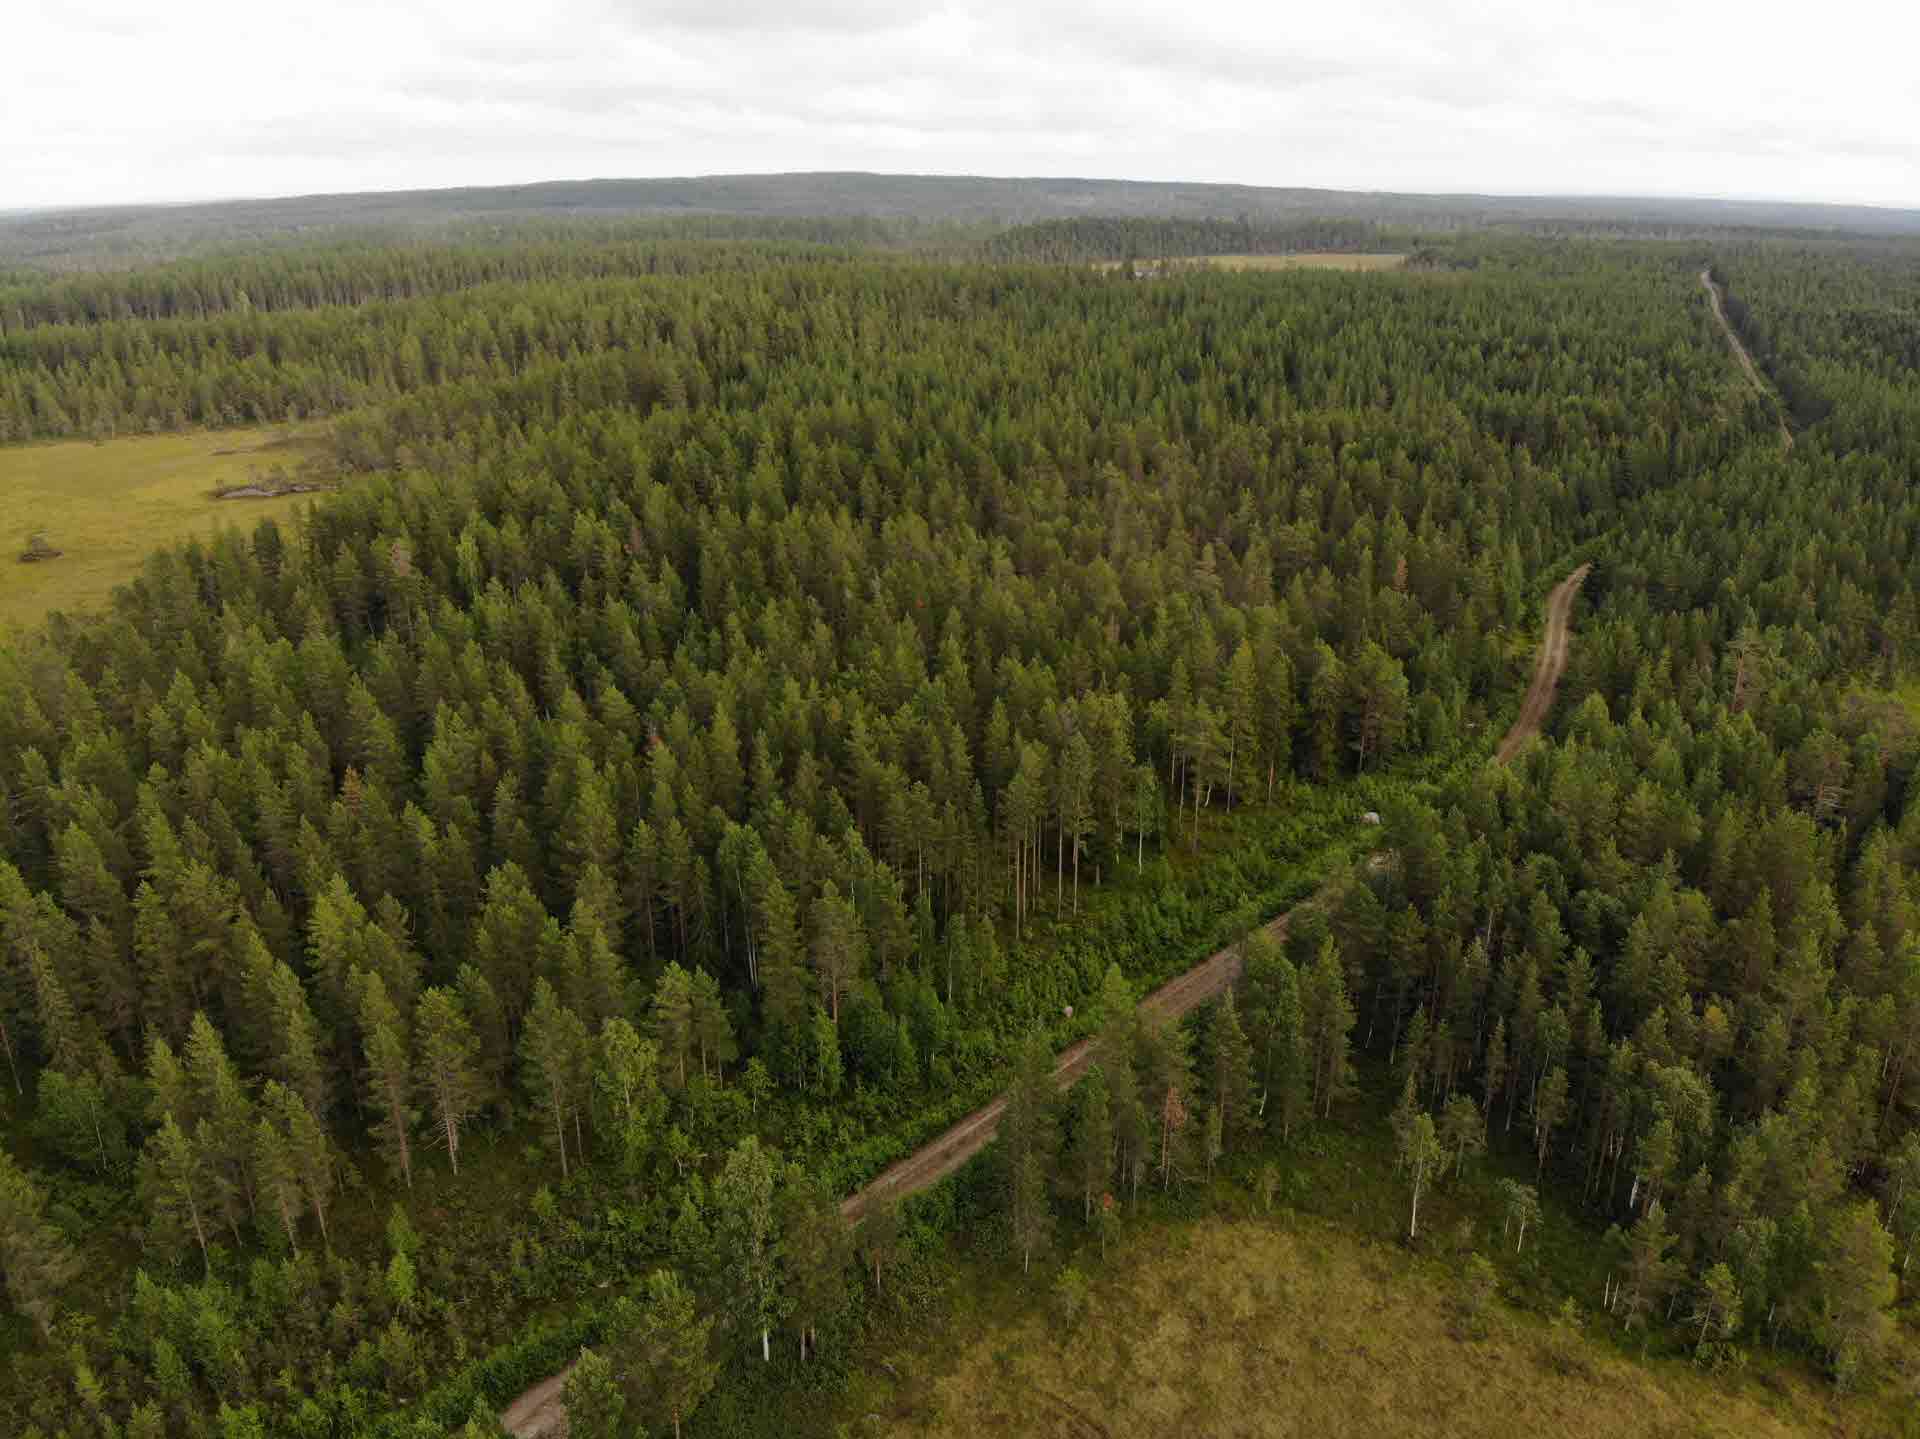 A drone image over a forest.